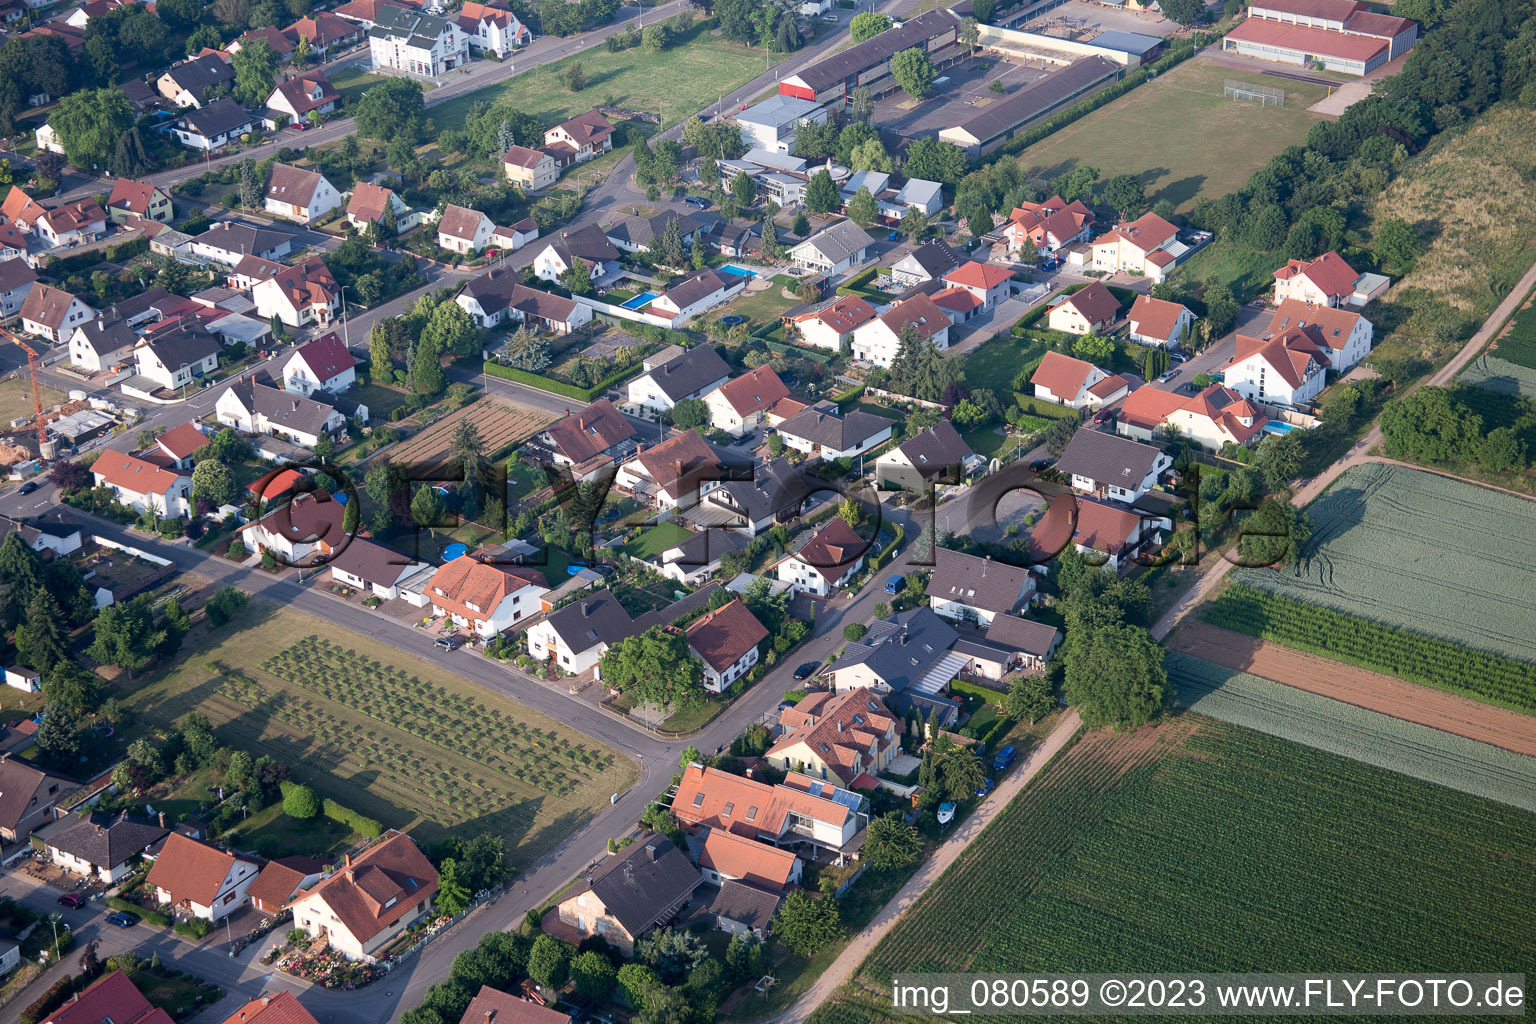 Lustadt in the state Rhineland-Palatinate, Germany from above